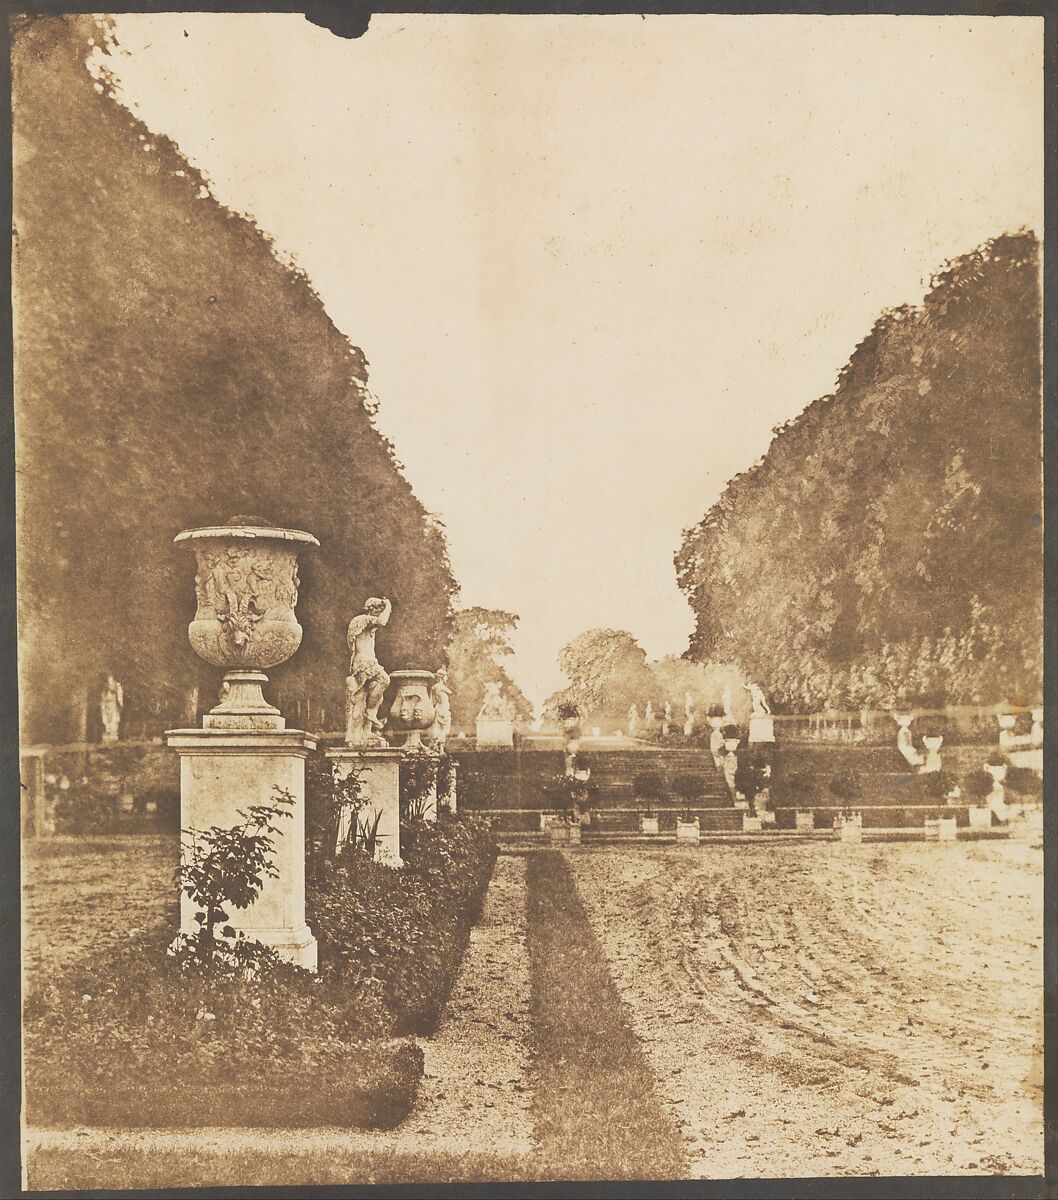 [Gardens of Saint-Cloud], Henri Victor Regnault  French, Salted paper print from paper negative